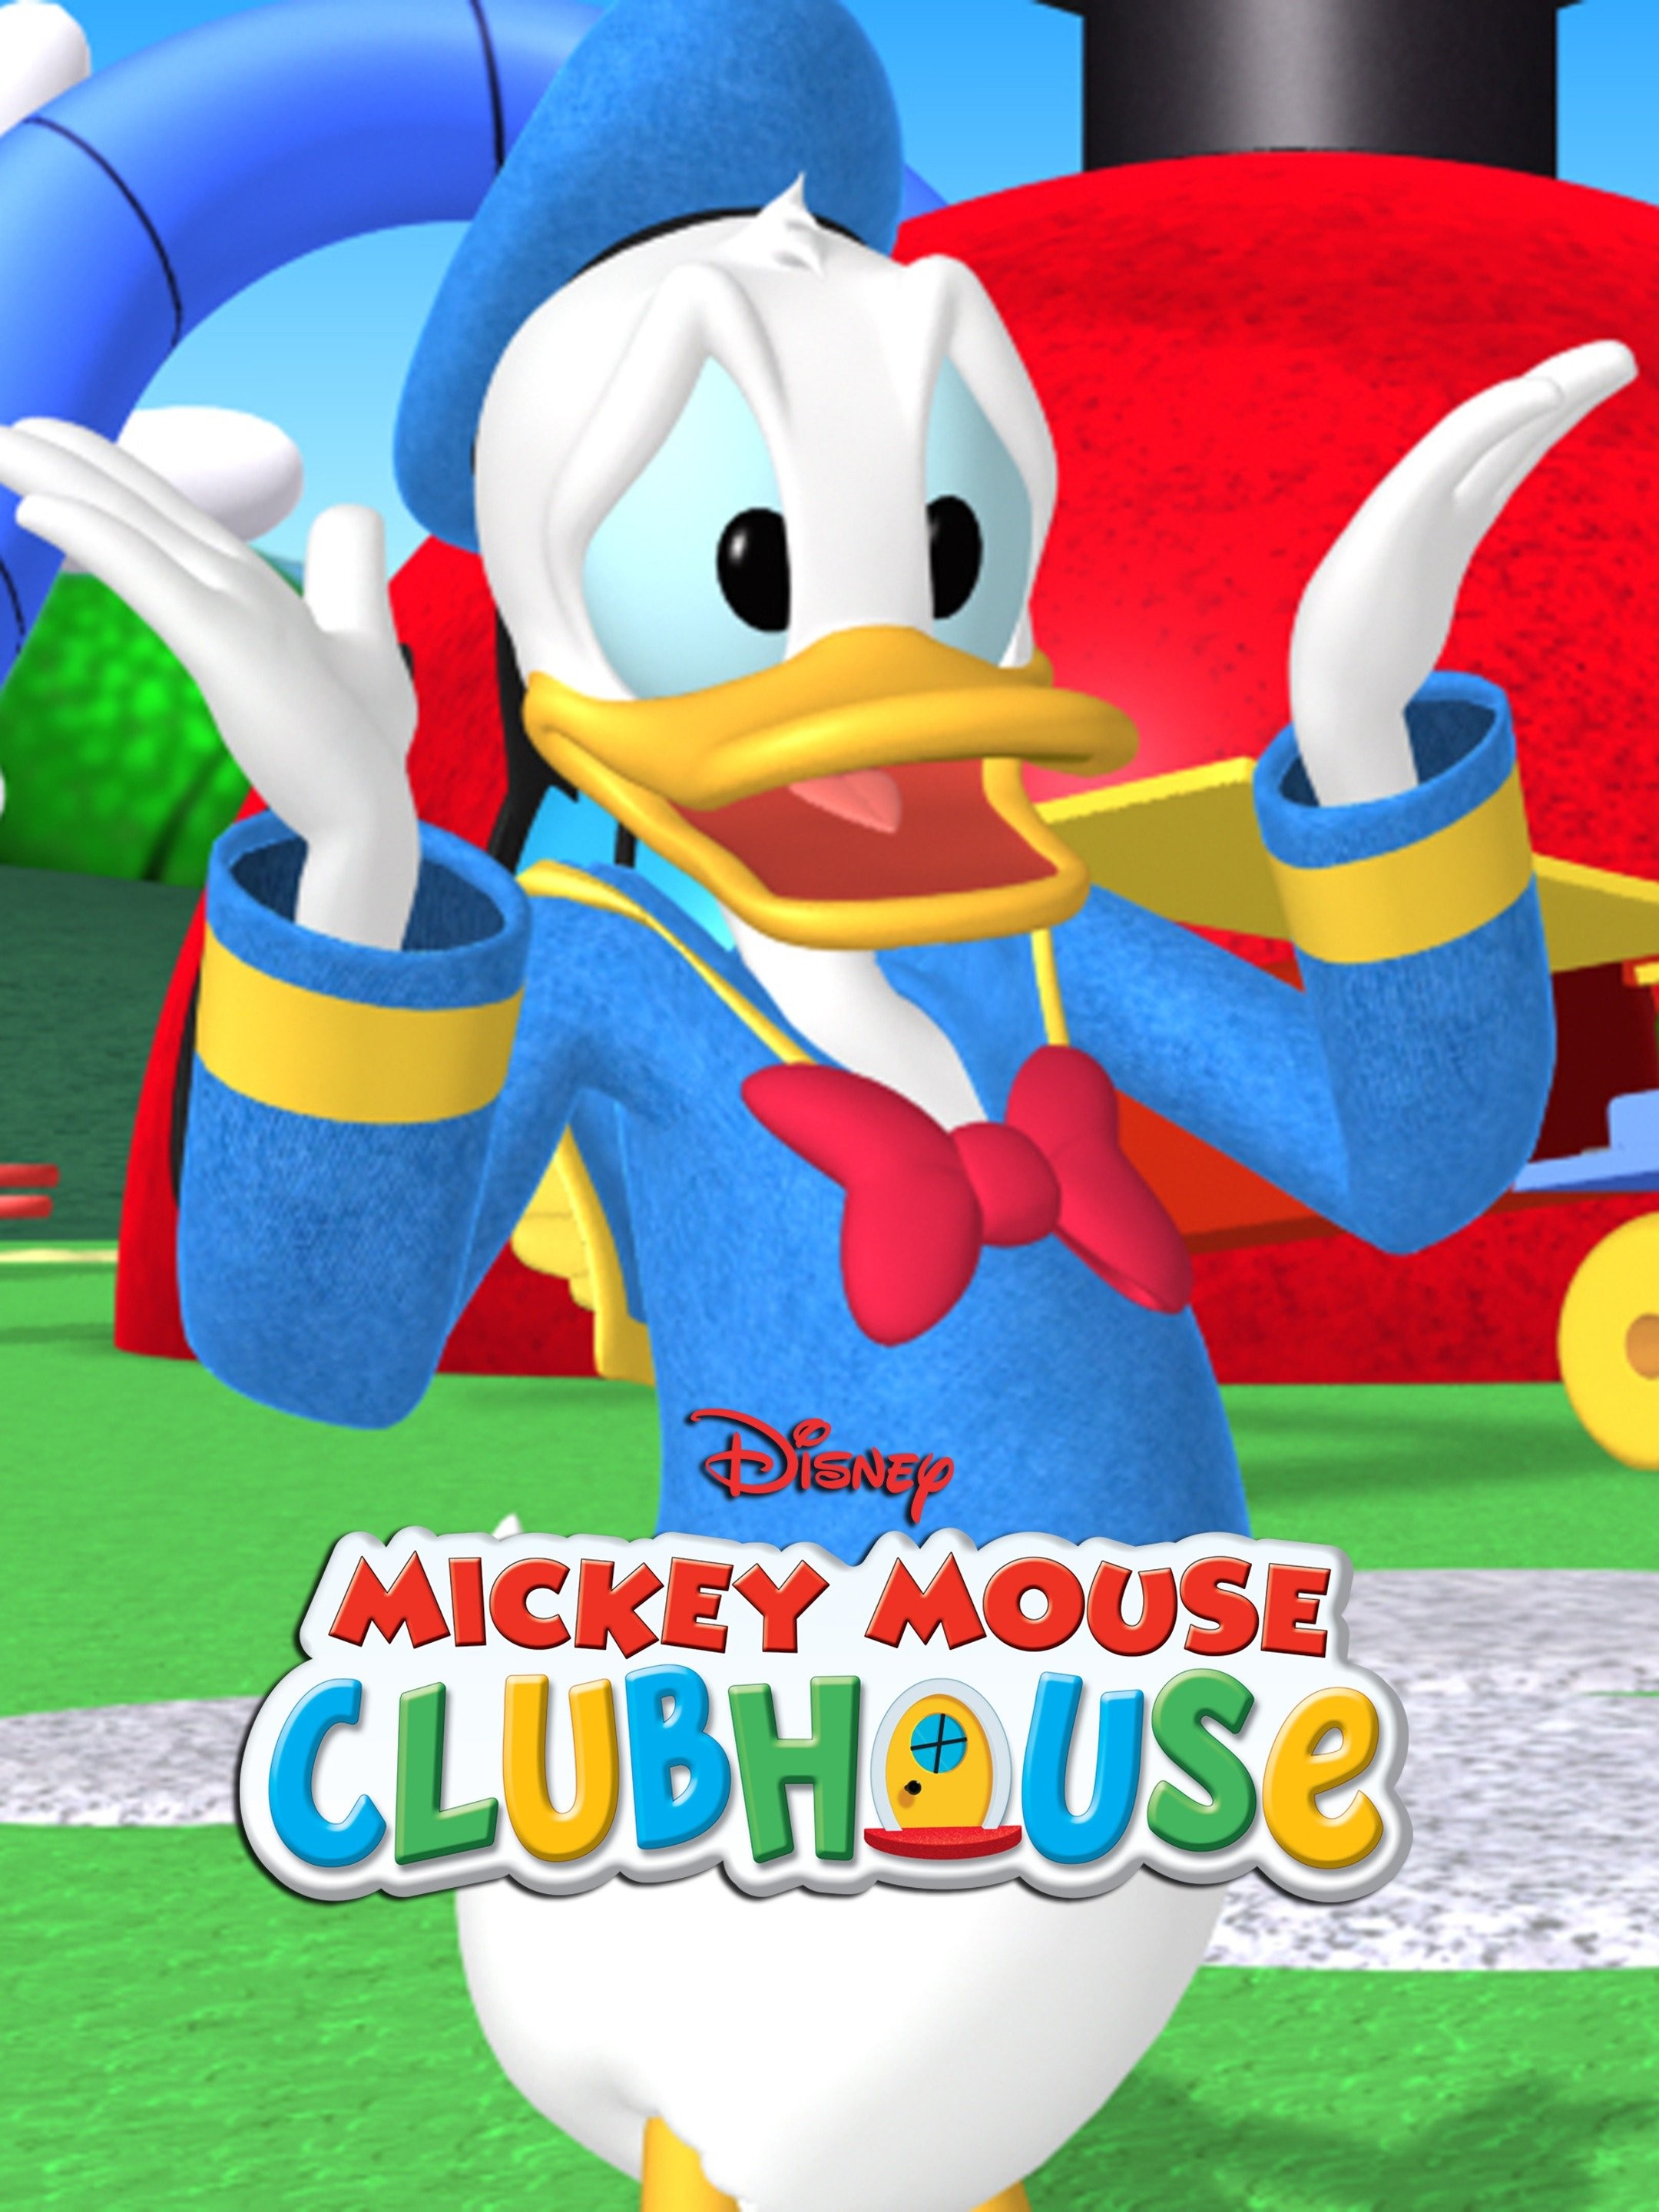 Mickey Mouse Clubhouse: Season 1, Episode 5 - Rotten Tomatoes